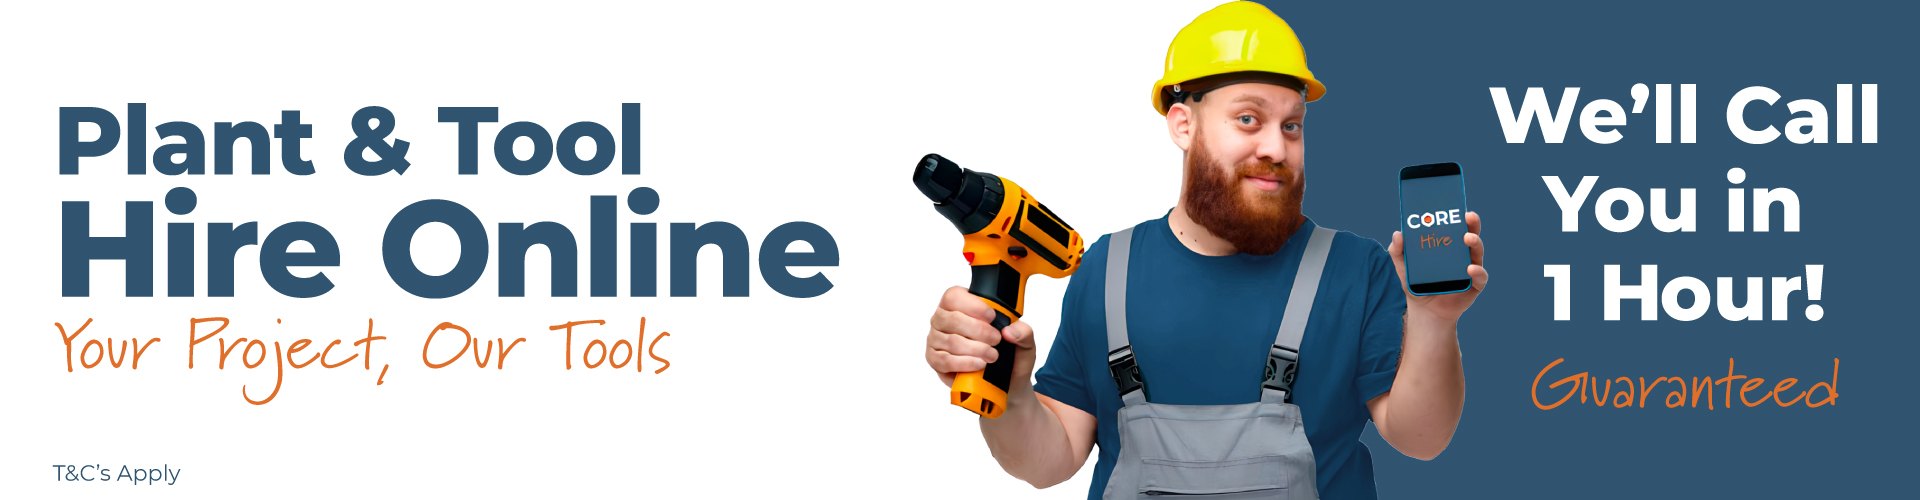 CORE Hire, Your Project, Our Tools!